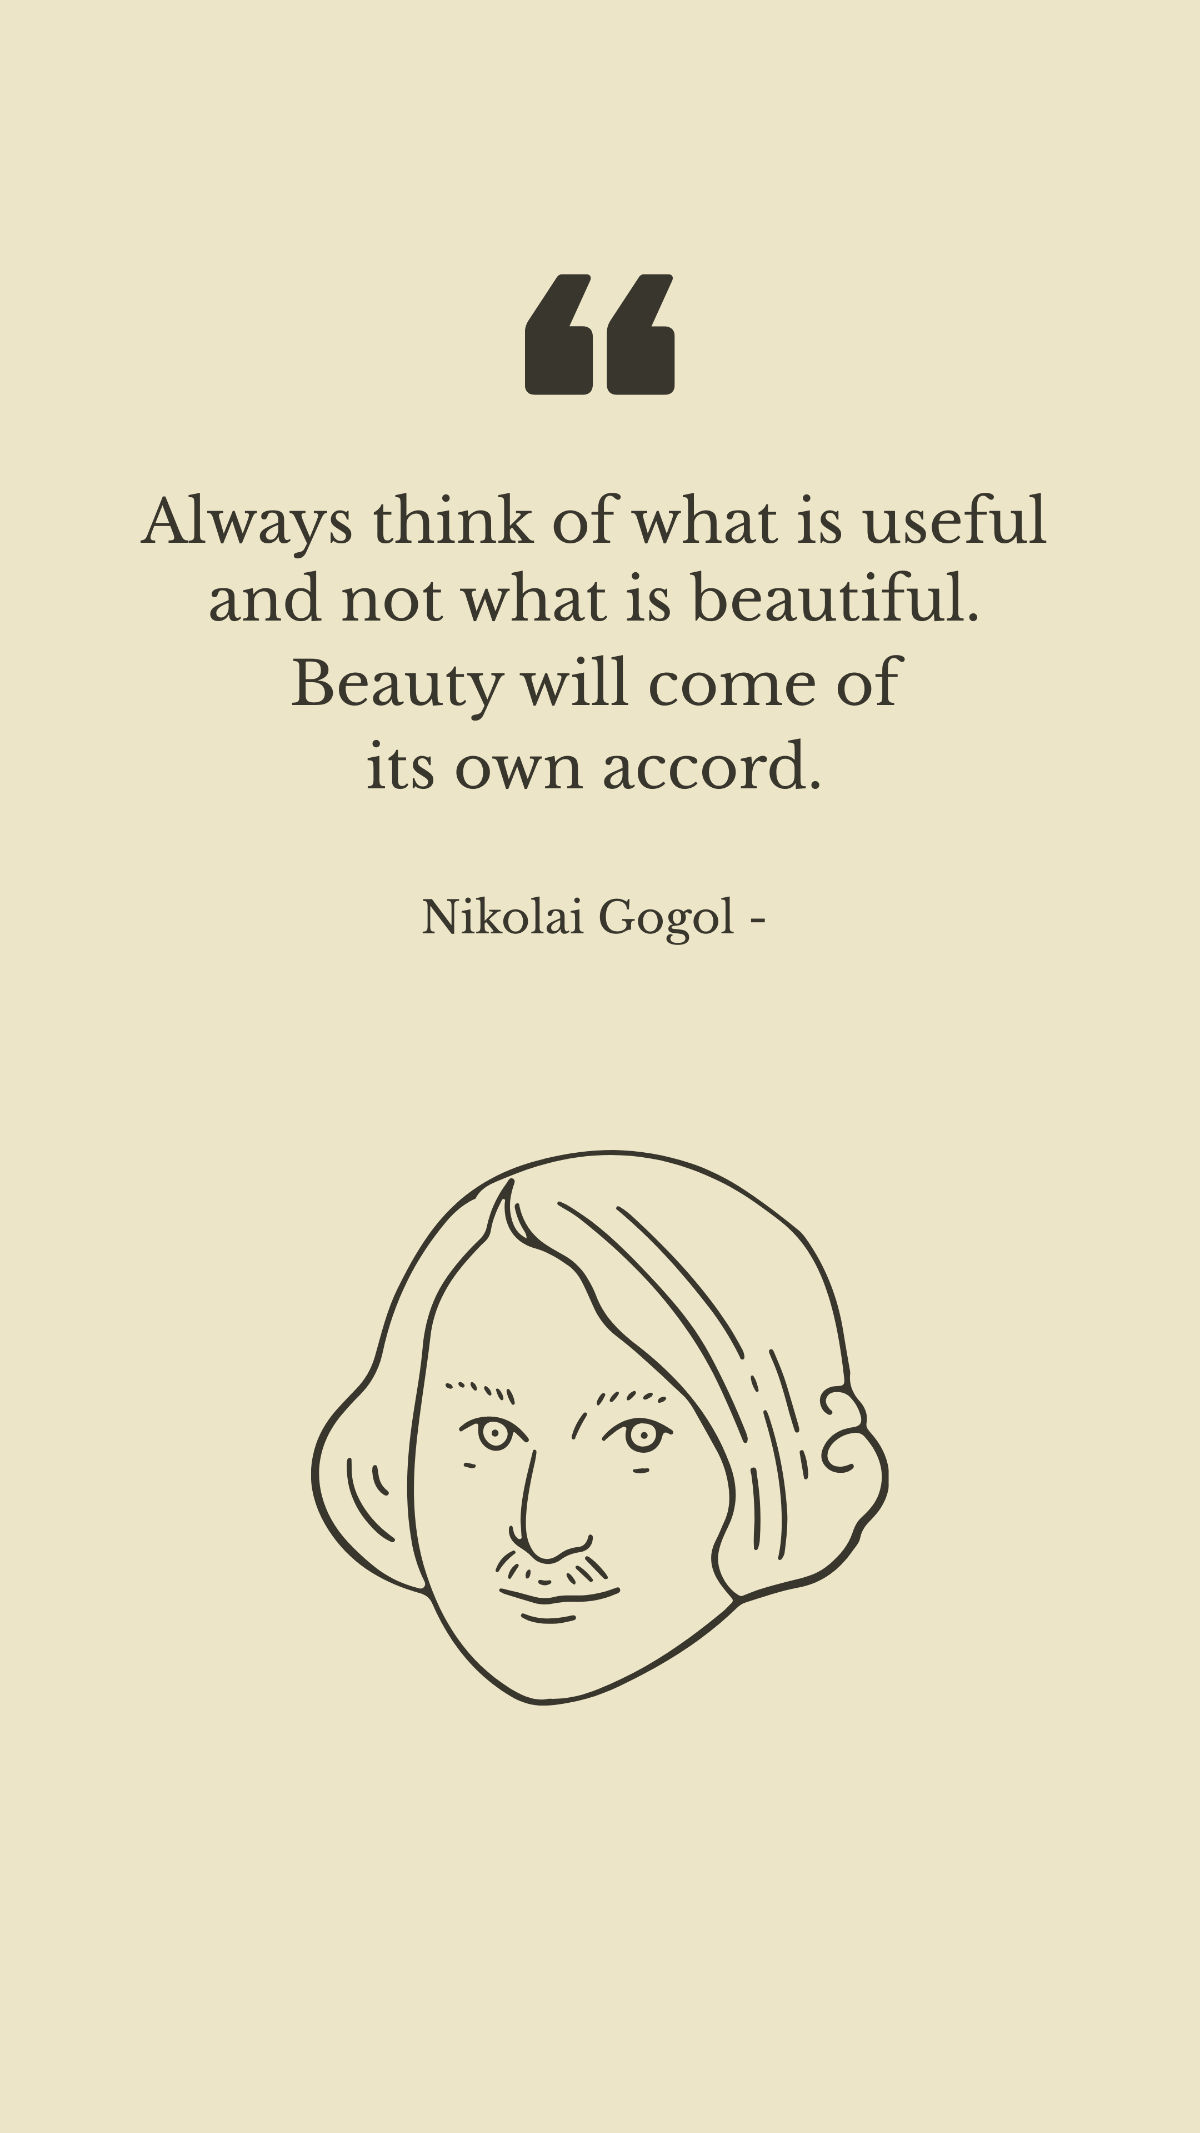 Nikolai Gogol - Always think of what is useful and not what is beautiful. Beauty will come of its own accord. Template